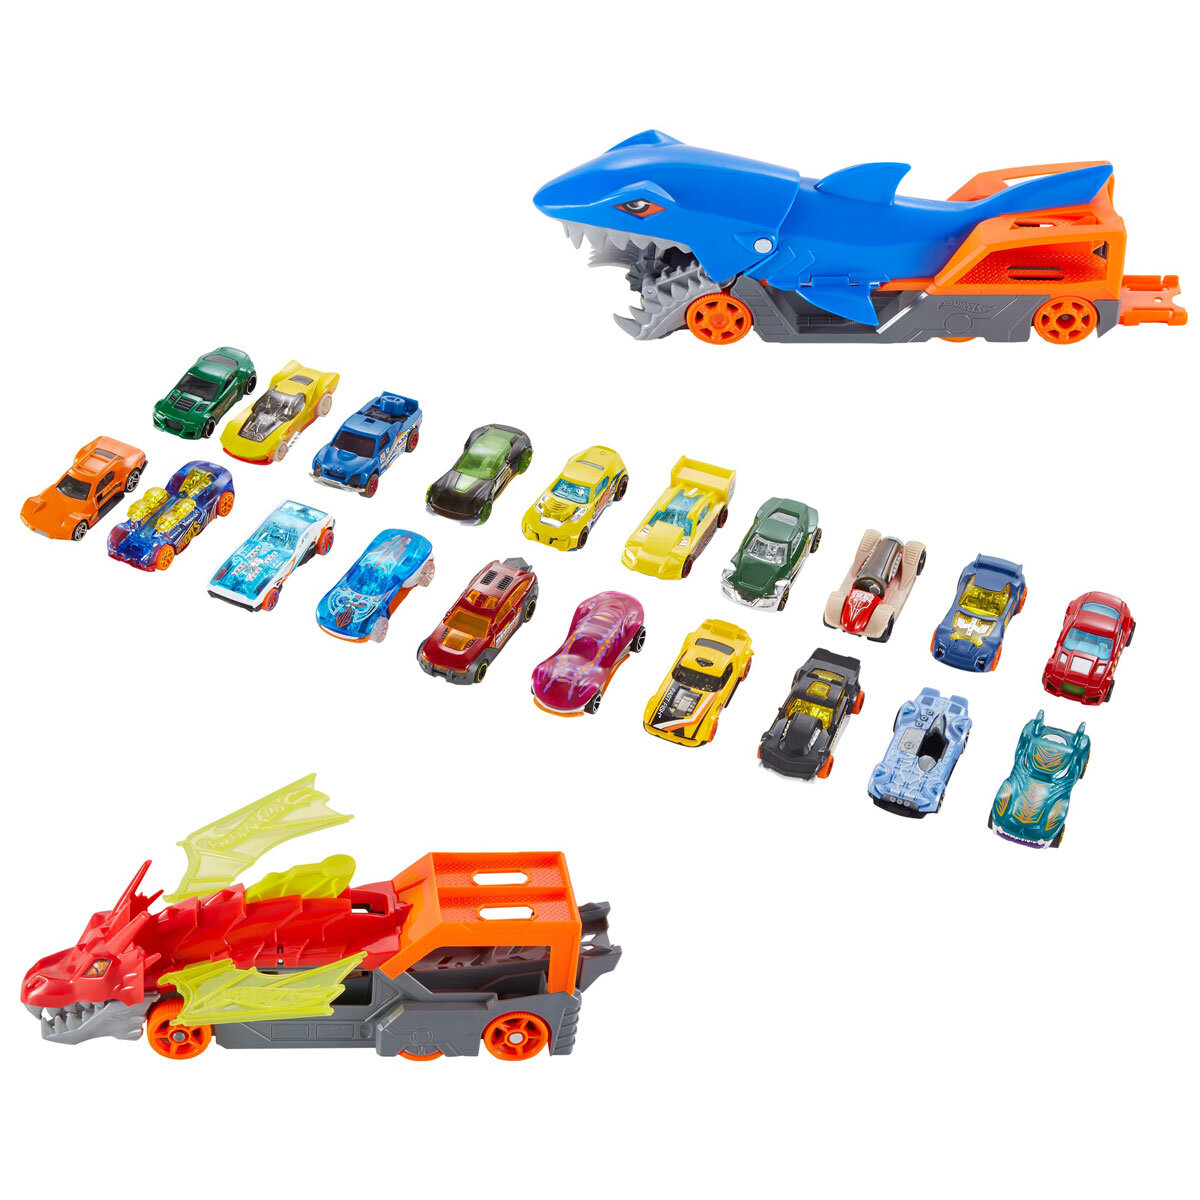 Hot Wheels Creatures Transporters Bundle Set with 20 Cars